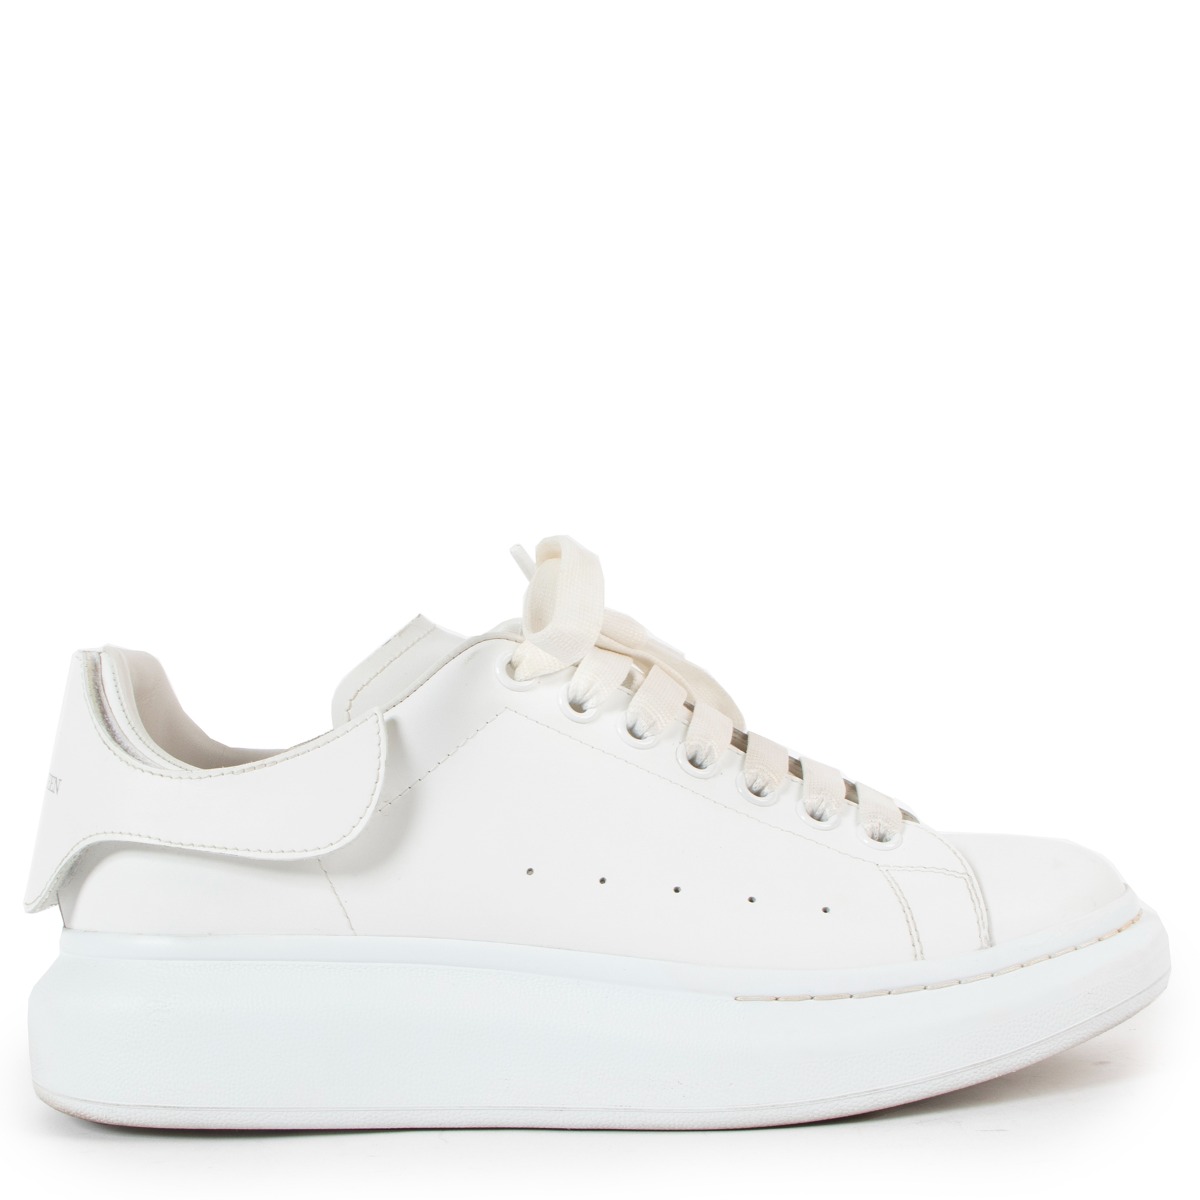 Alexander Mcqueen Girls White/Holographic Leather Larry Velcro Sneakers,  Brand Size 26 (10 Toddler) 710107 WHX15 9035 - Shoes, Alexander McQueen -  Jomashop